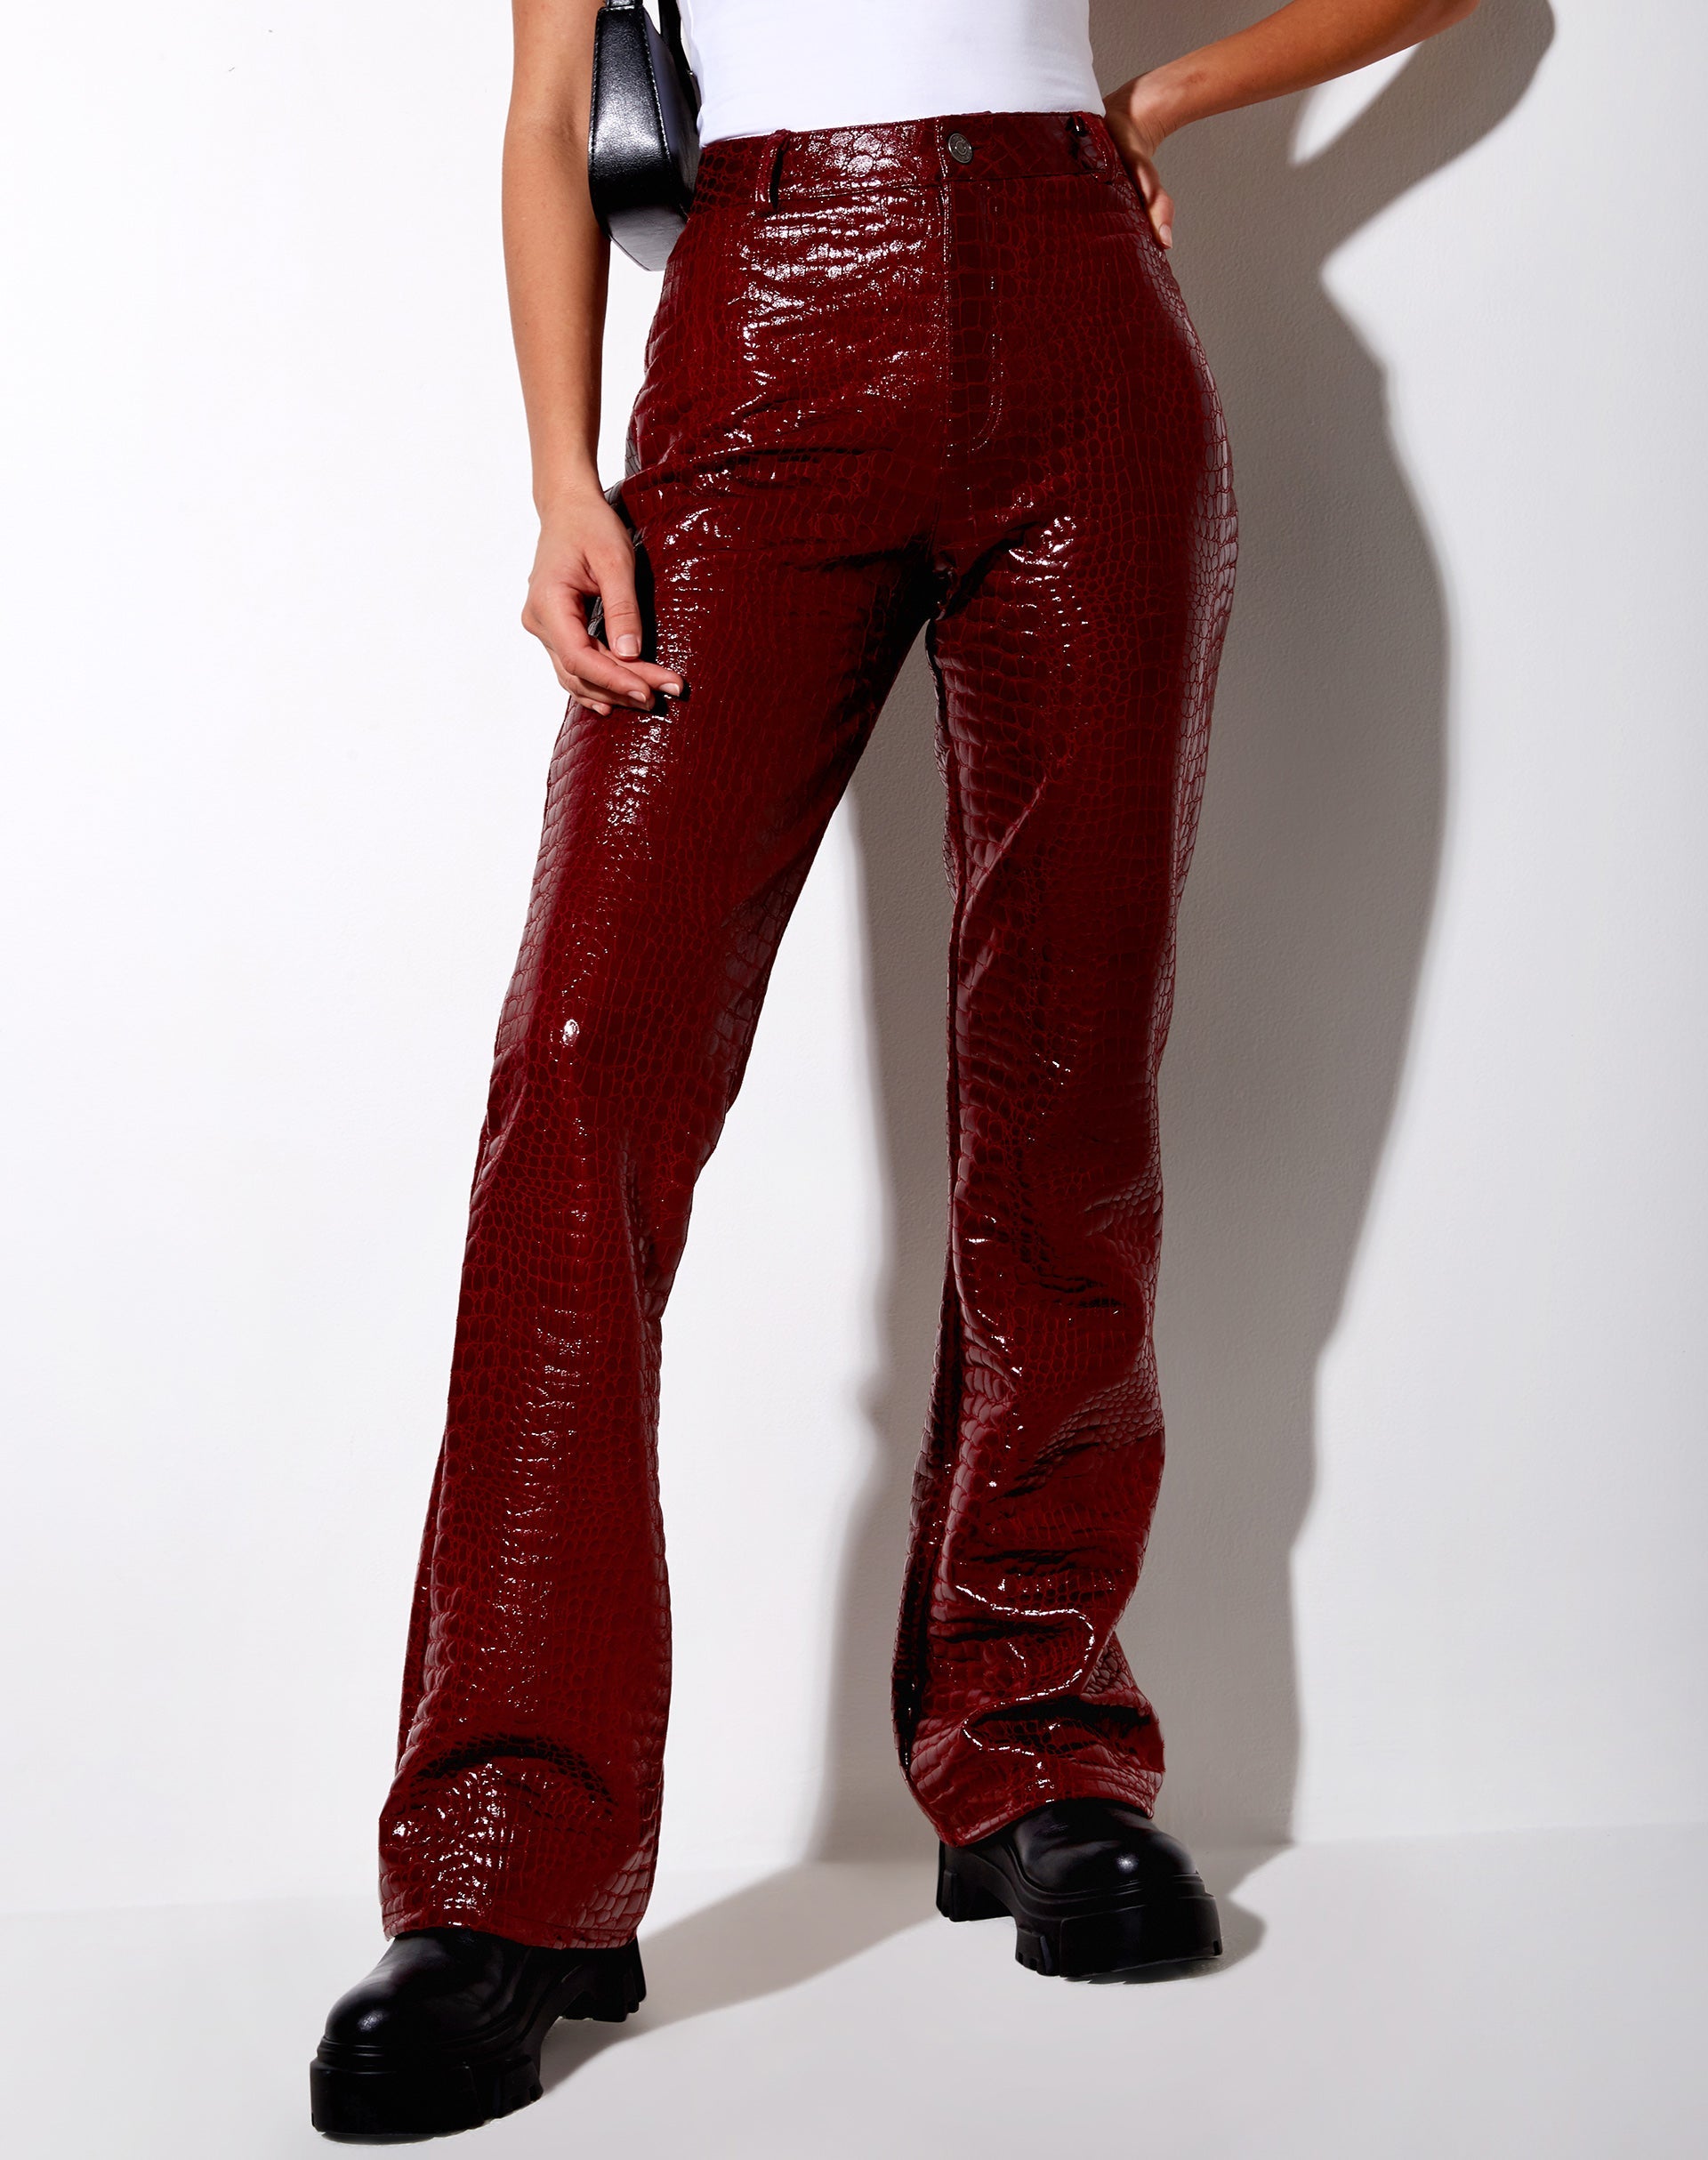 Image of Zoven Trouser in Croc PU Burgundy